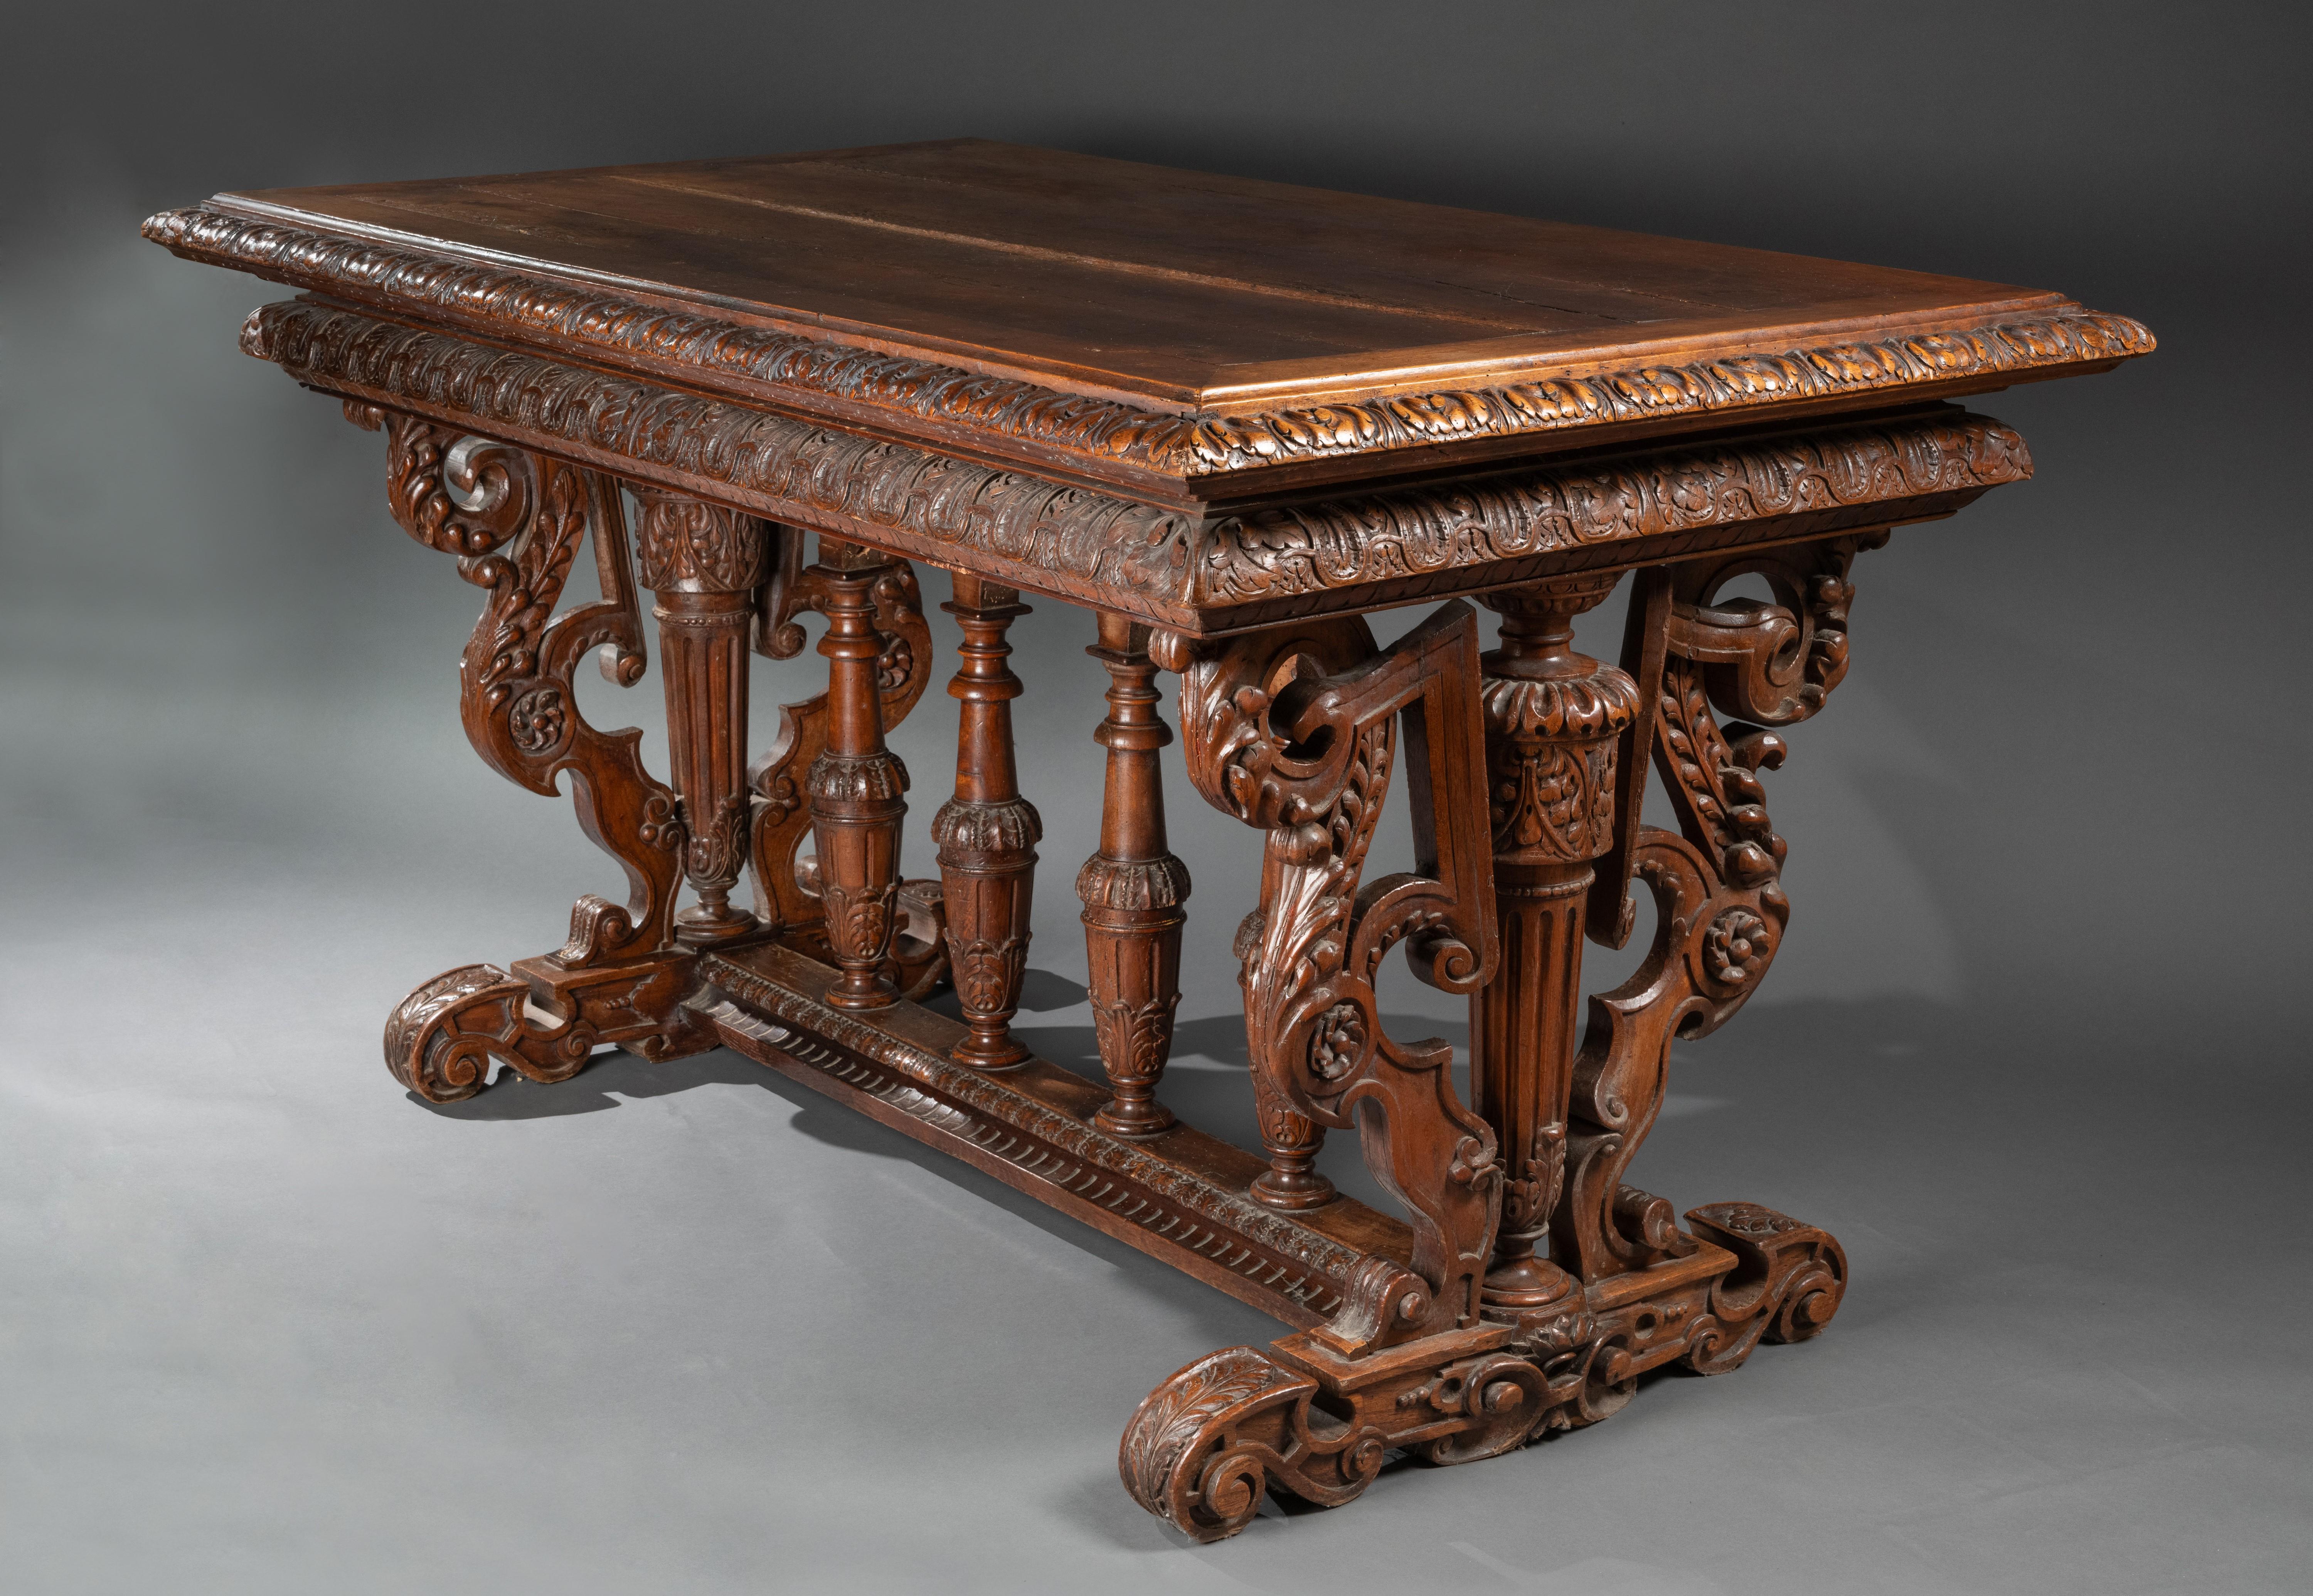 A late 16th century Renaissance richly carved walnut center table
France, The Loire Valley area
Dimensions: h. 33.46 in., w. 59.45 in., d. 36.22 in. 

Our remarquable table is a fabulous example of French renaissance castle furniture.
The rich